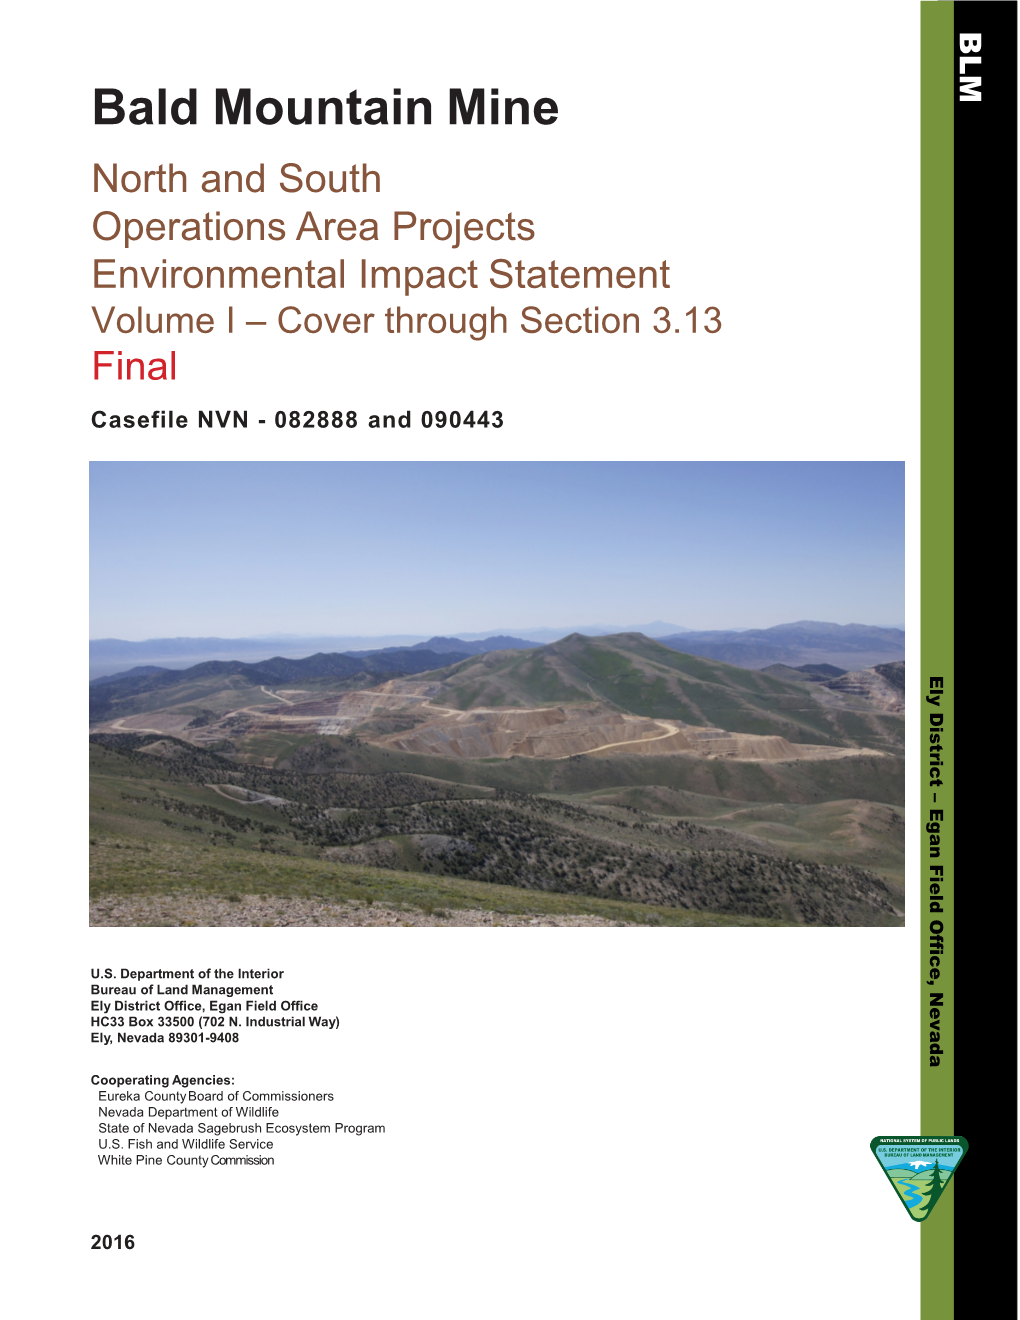 Bald Mountain Mine North and South Operations Area Projects Final